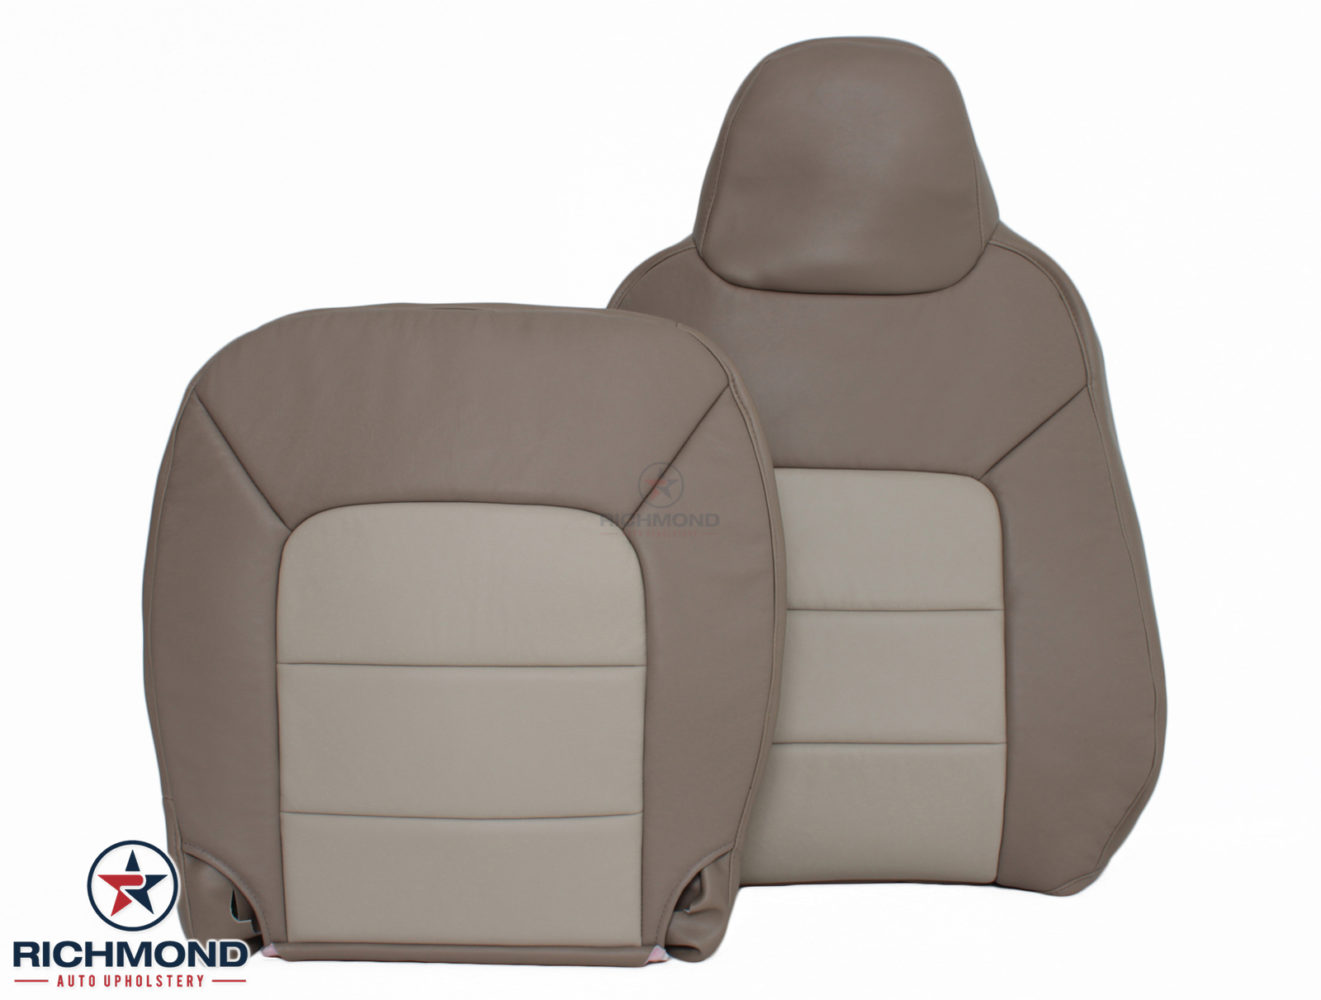 2003-2006 Ford Expedition Eddie Bauer Leather Seat Cover: Driver Side  Complete Set, Tan - Richmond Auto Upholstery